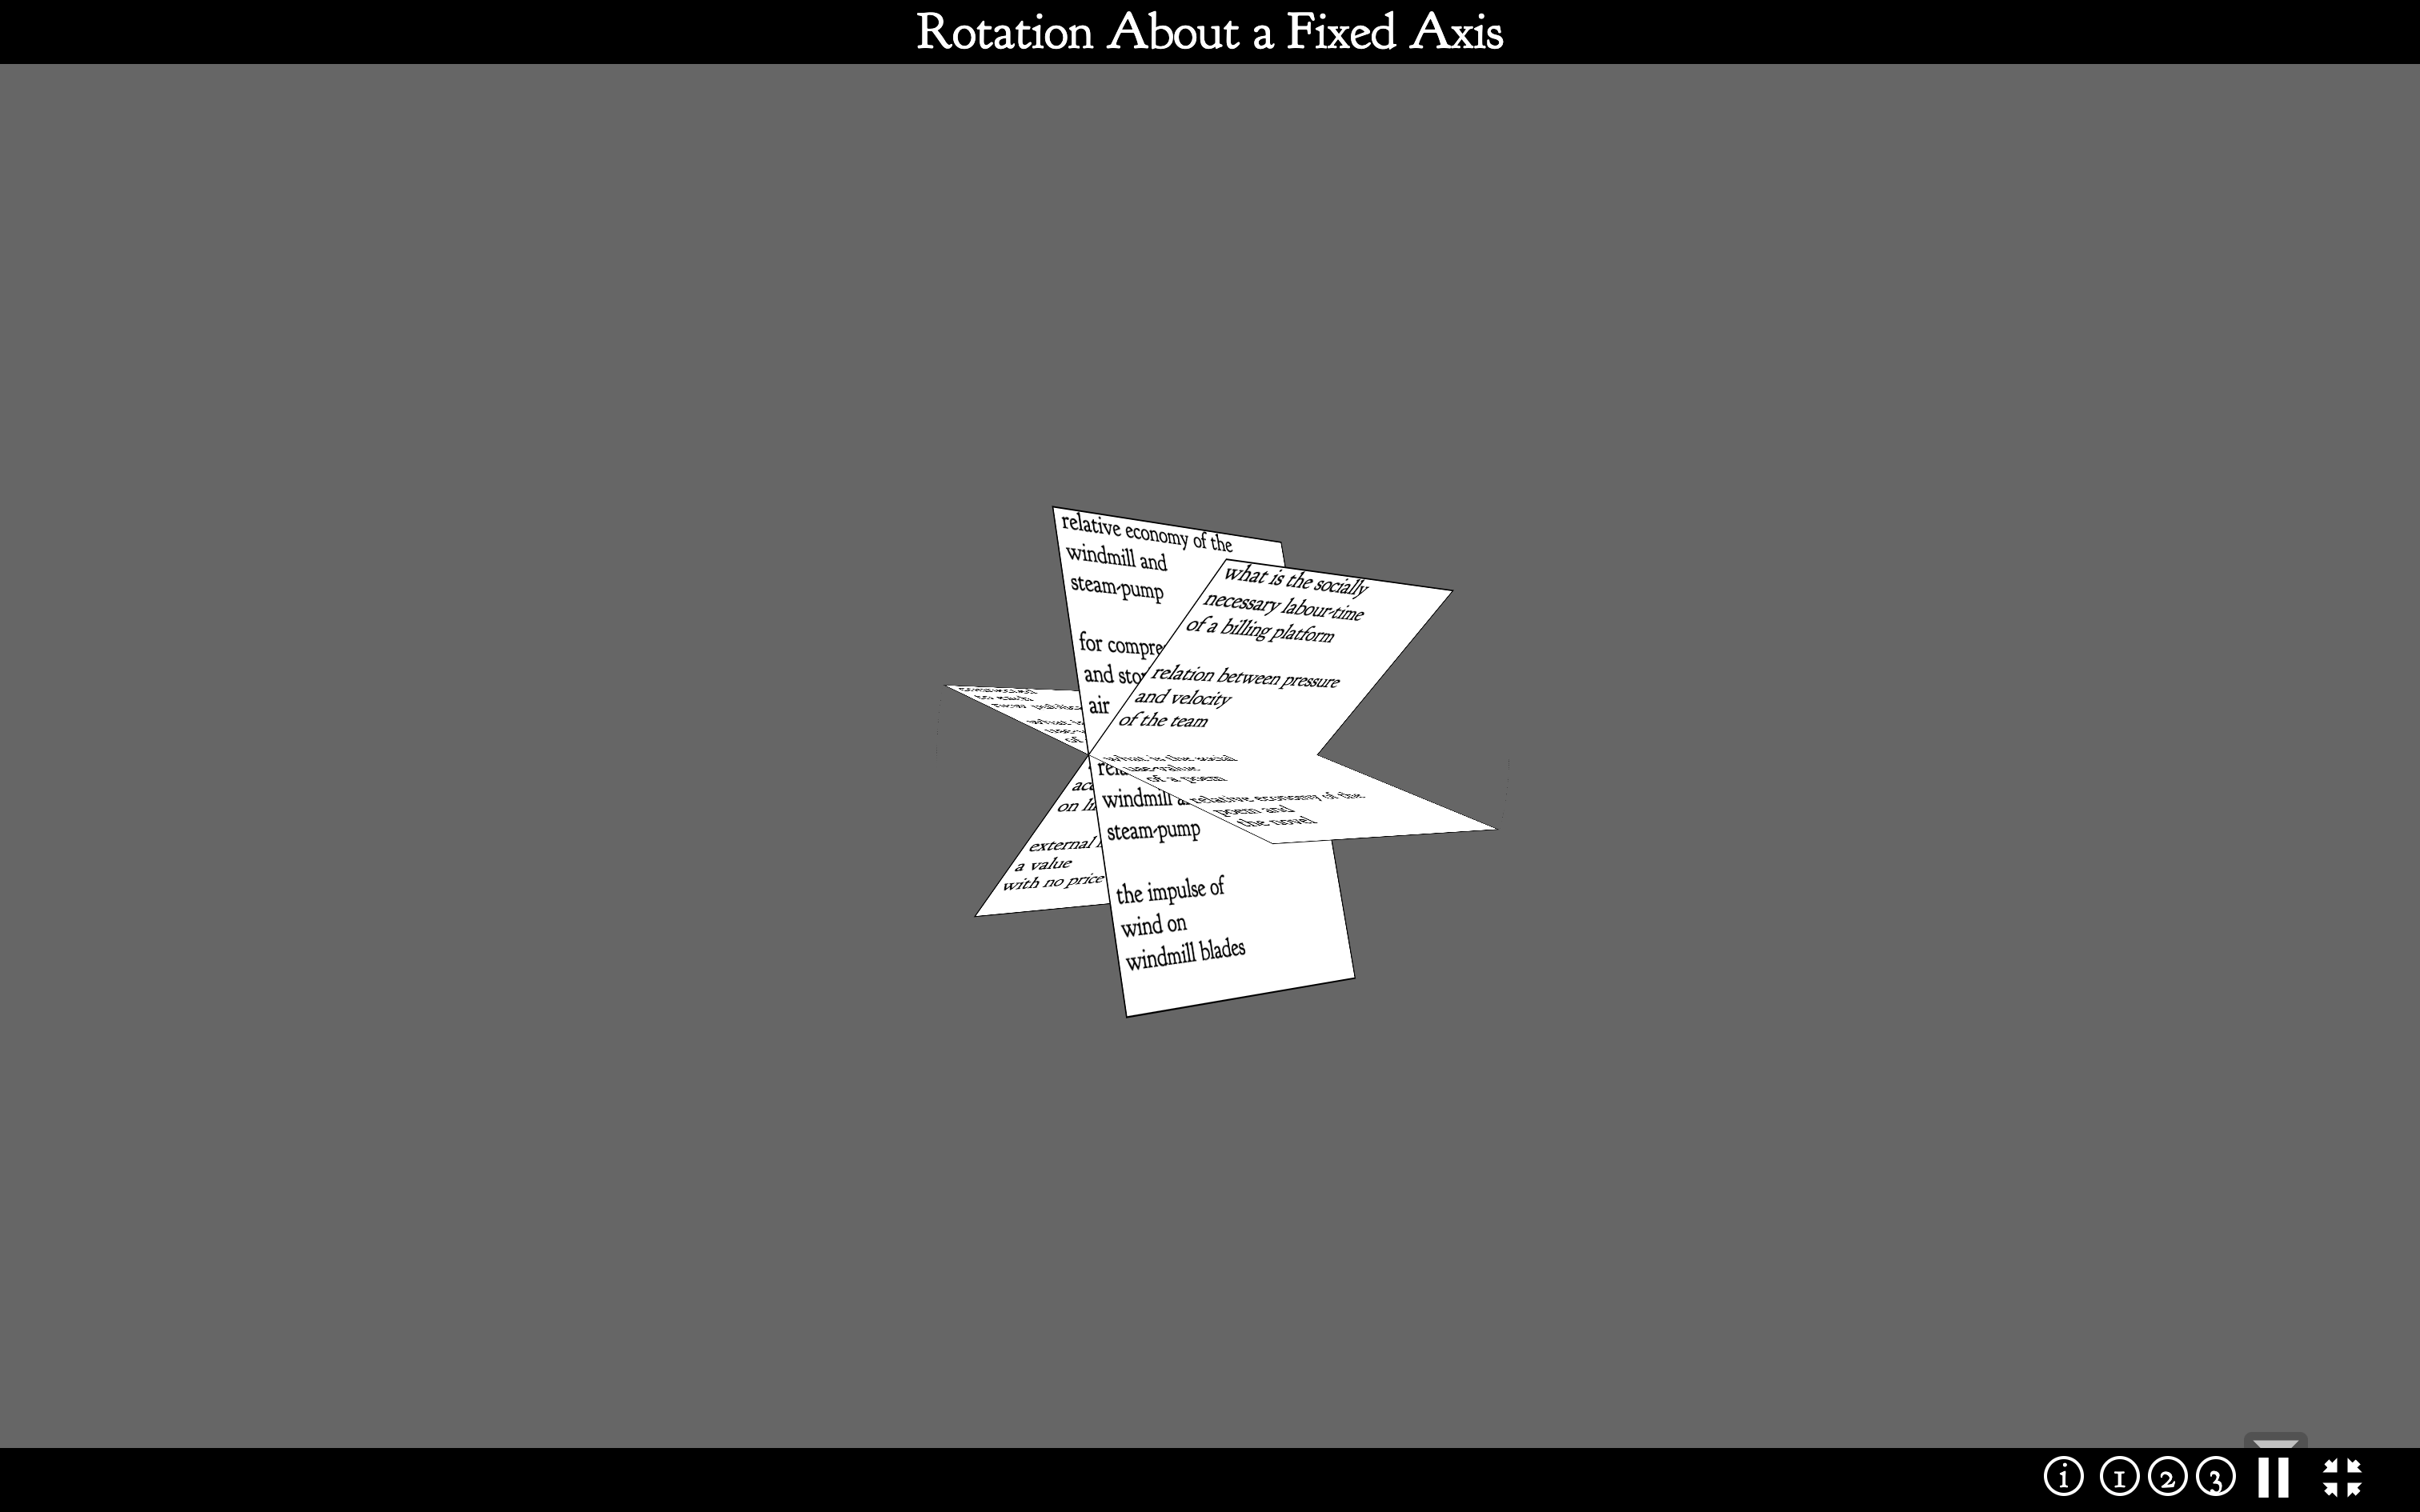 Rotation About a Fixed Axis